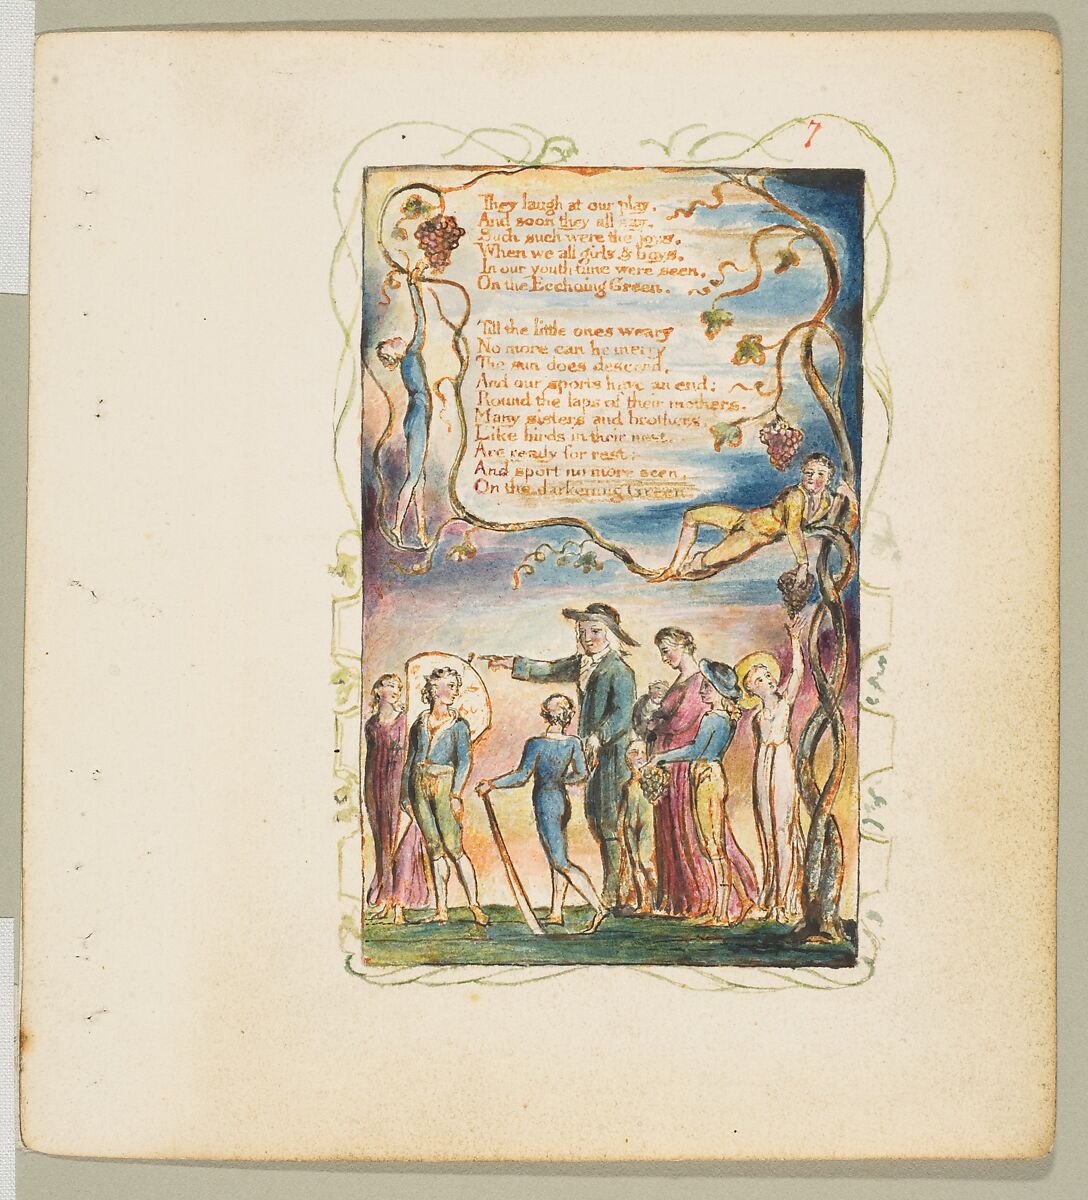 Songs of Innocence: The Ecchoing Green (second plate), William Blake, Relief etching printed in orange-brown ink and hand-colored with watercolor and shell gold